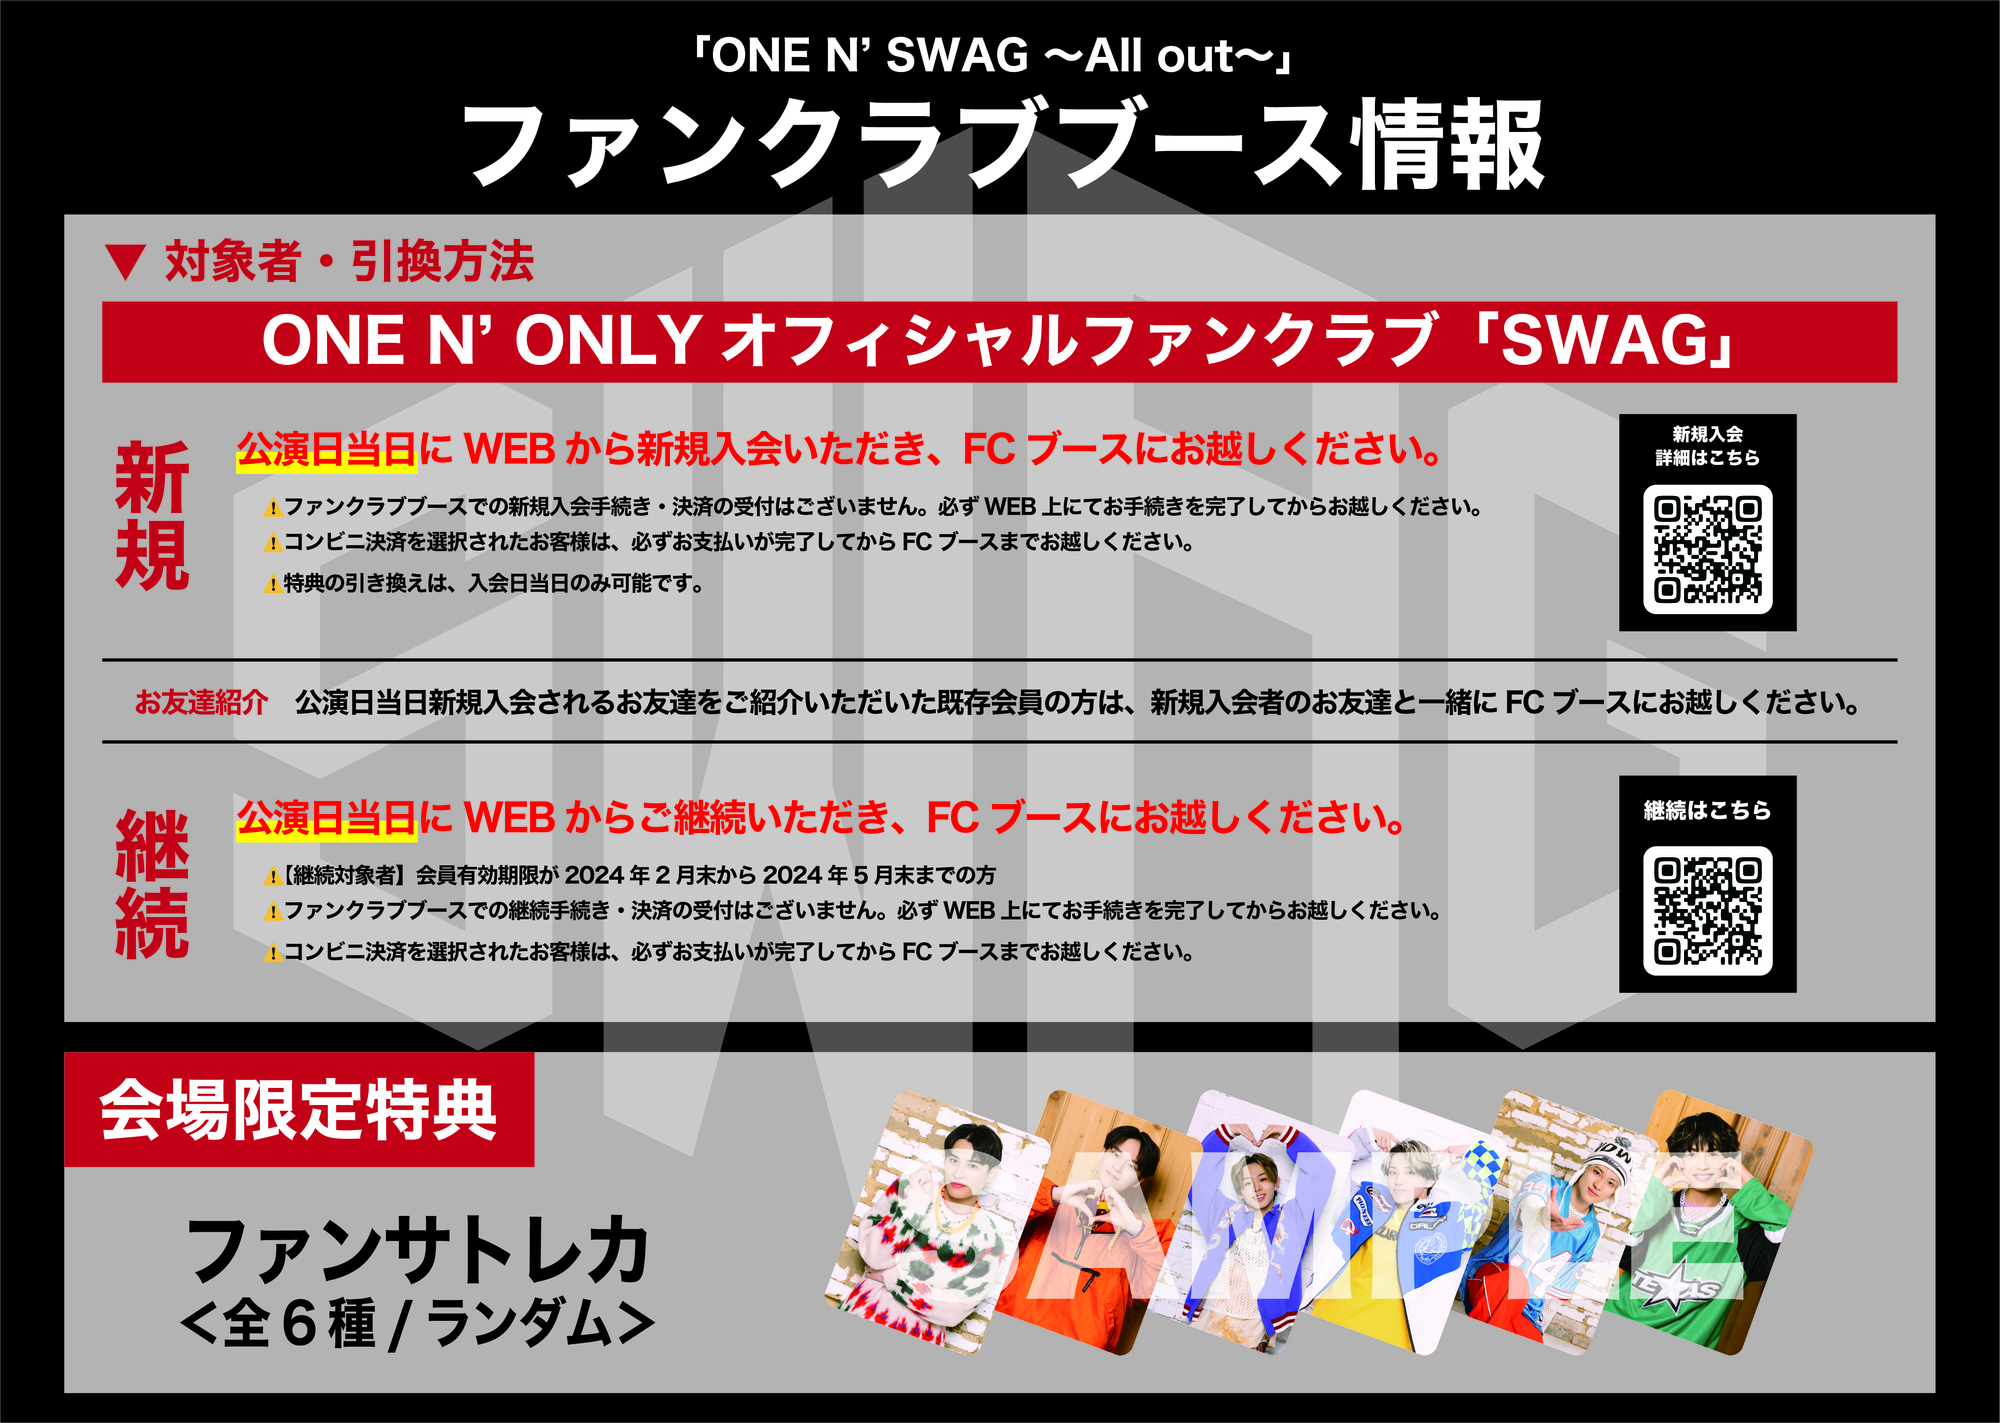 ONE N' SWAG 〜All out～」FCブース詳細決定！ | ONE N' ONLY OFFICIAL 